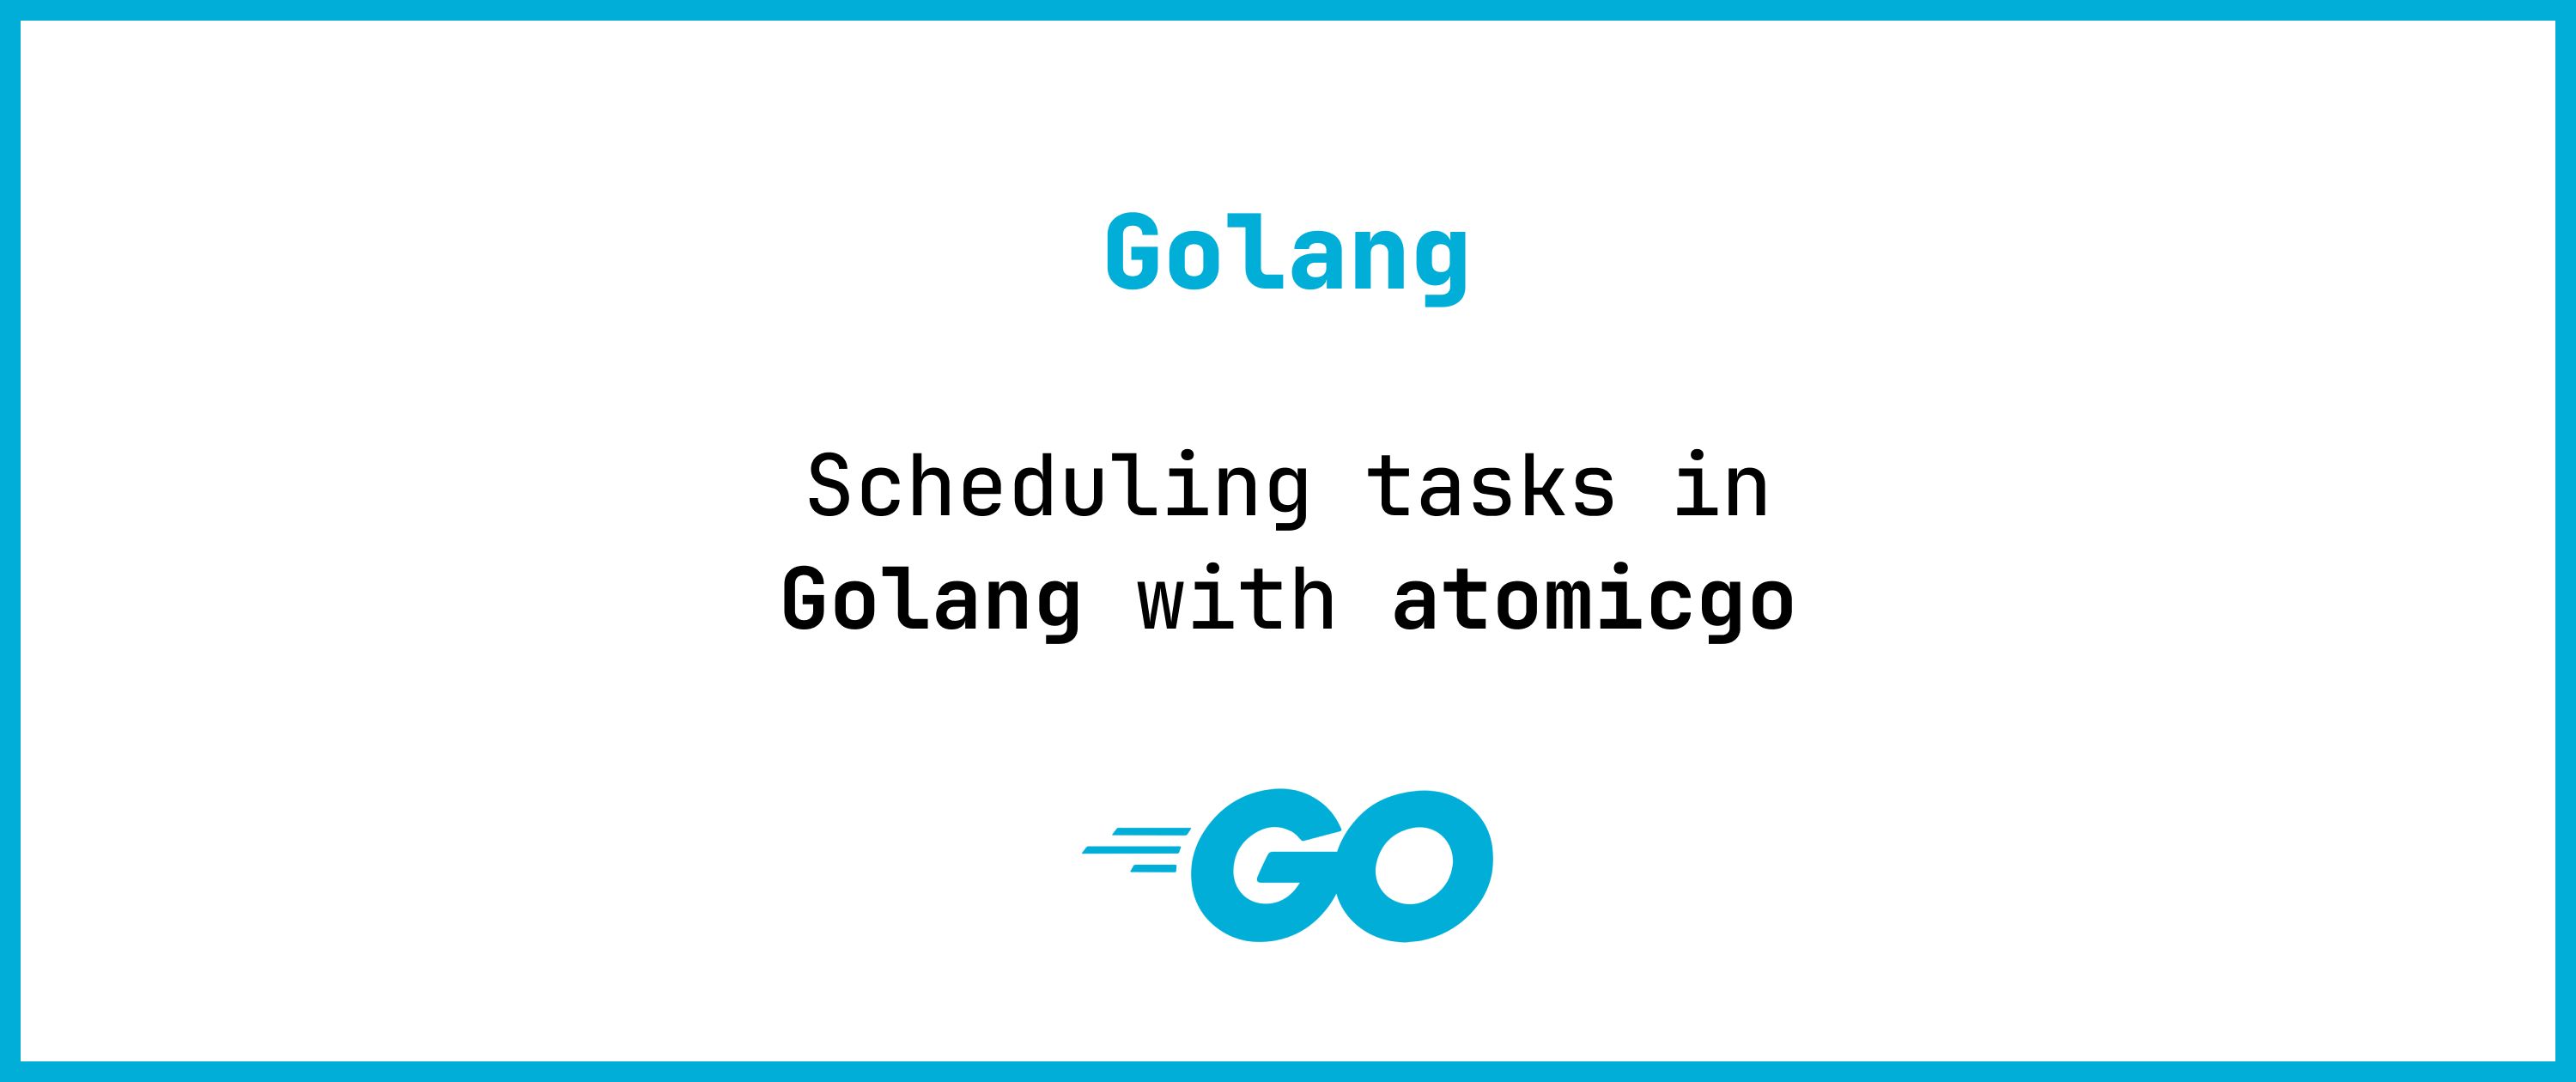 Scheduling tasks in Golang with atomicgo